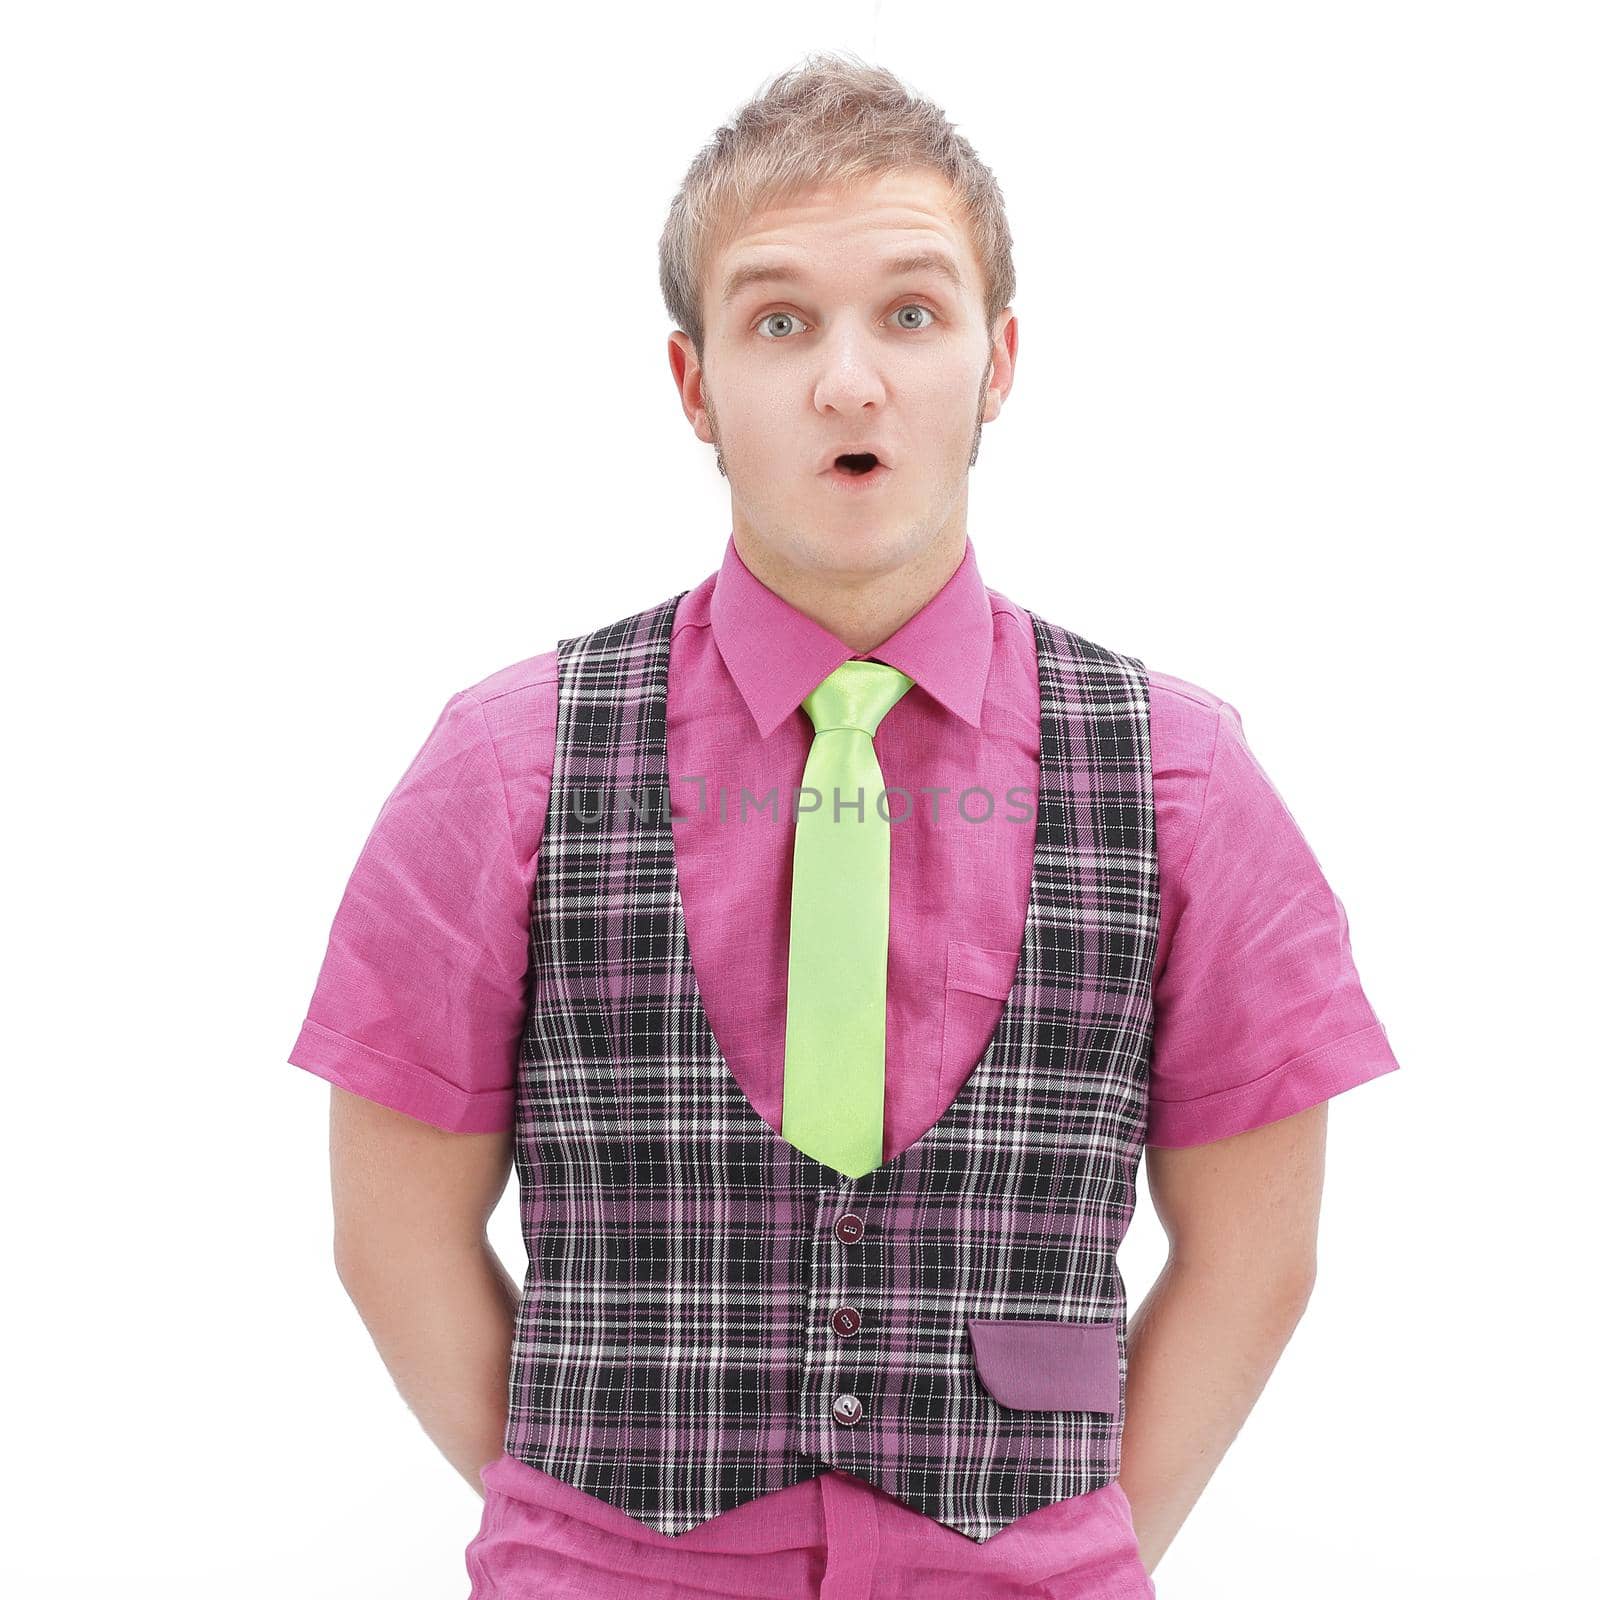 surprised young man in a plaid jacket and bright shirt.isolated on a white background.